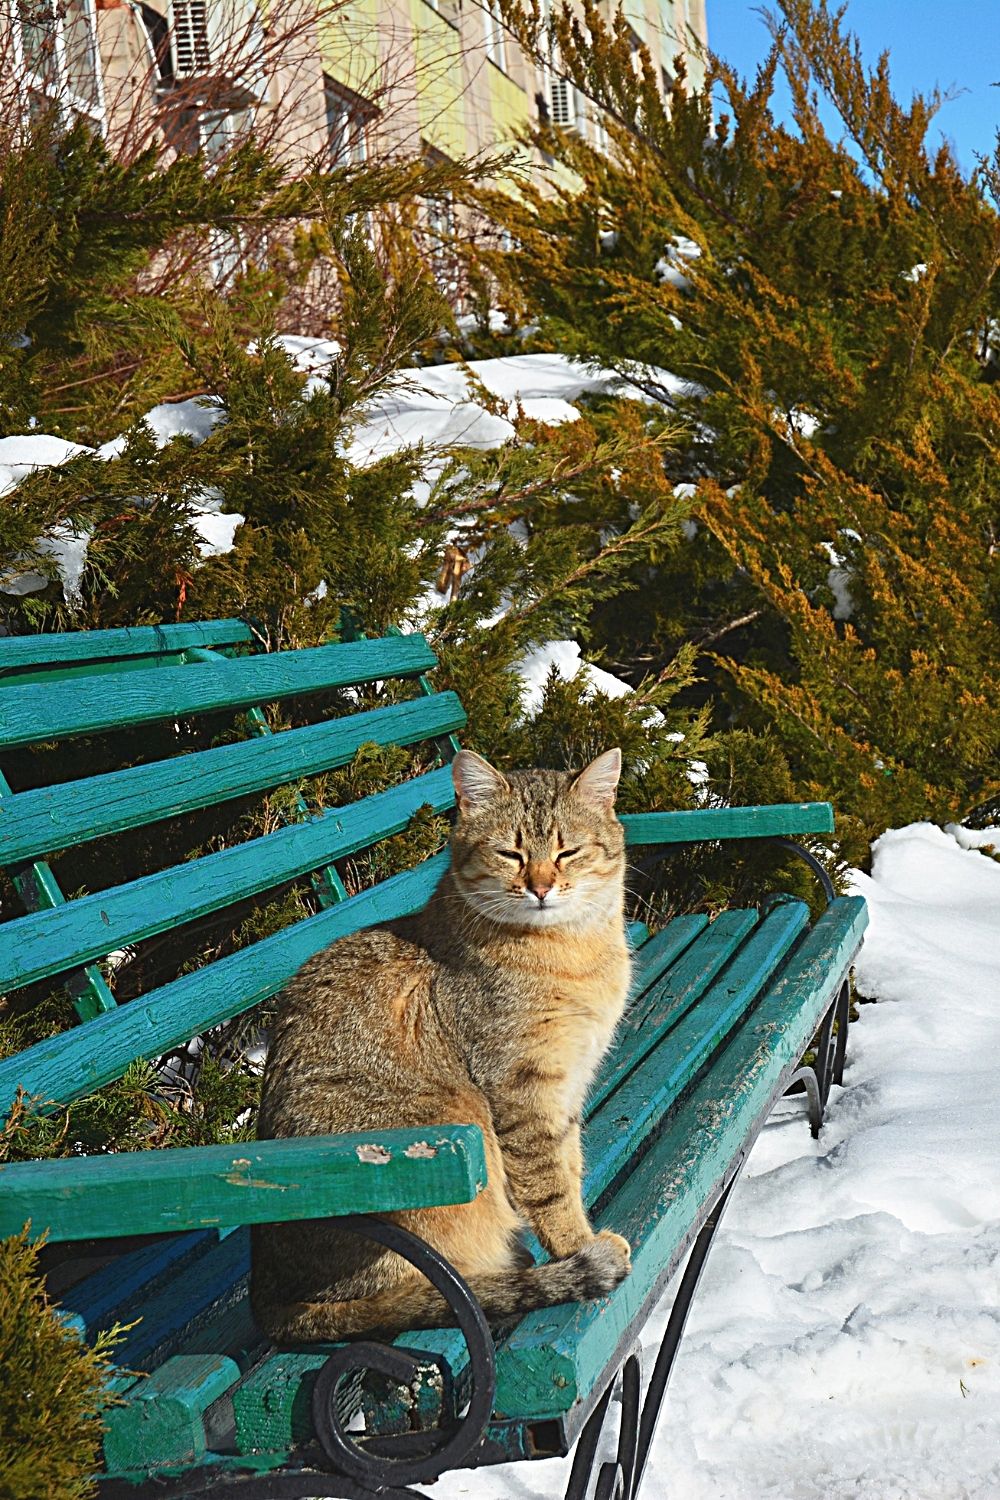 You can still show kindness to a stray or homeless cat to make it more comfortable during the cold months